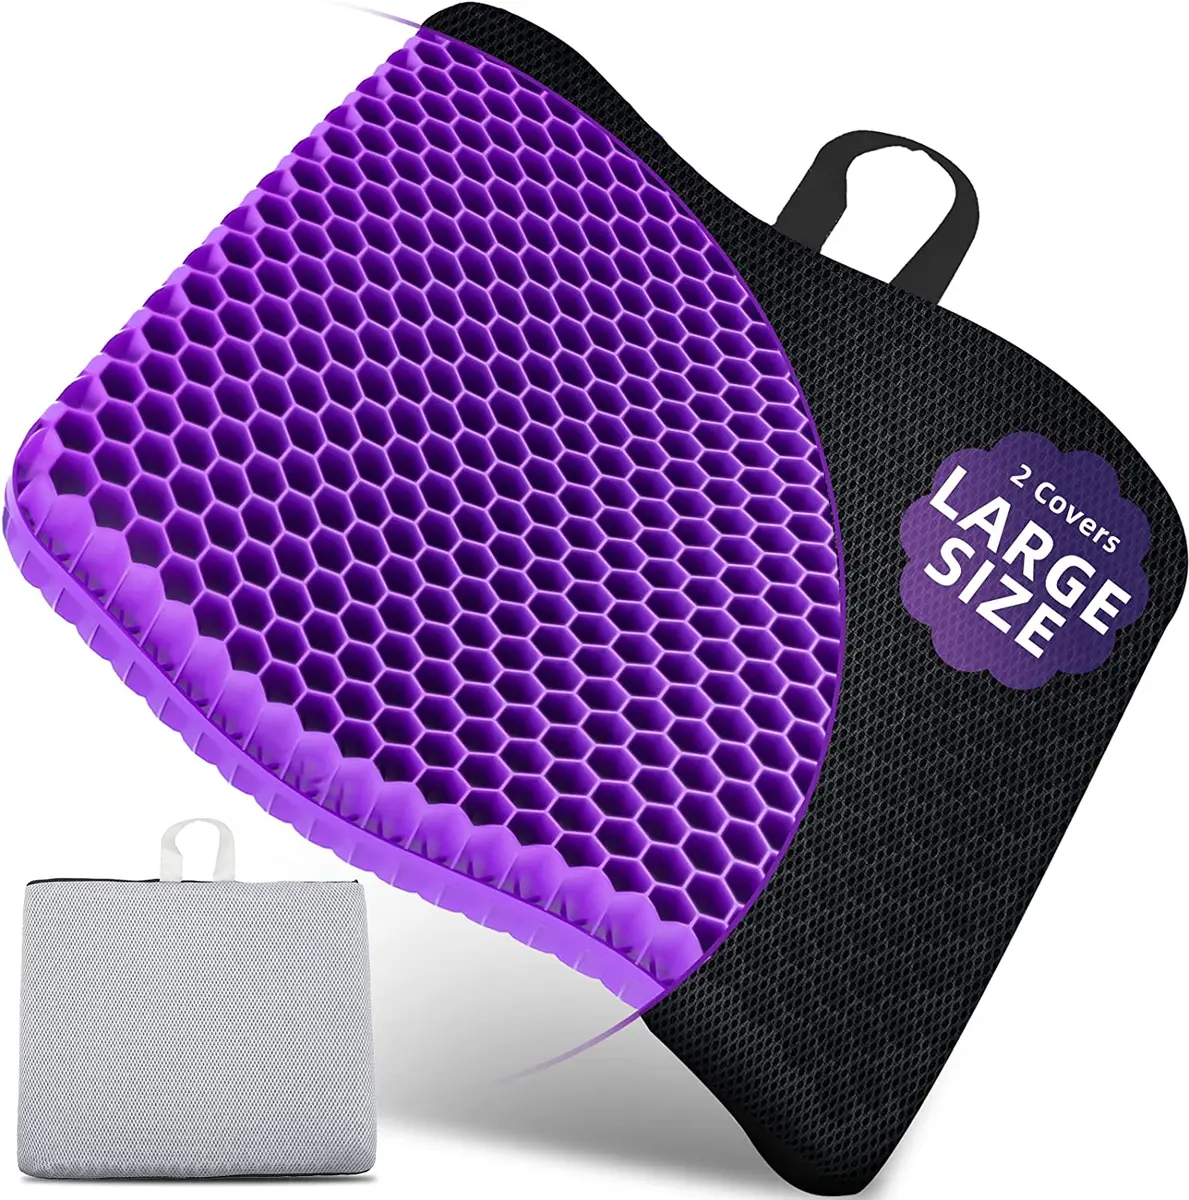 Super Large & Thick Gel Seat Cushion for Long Sitting, Office